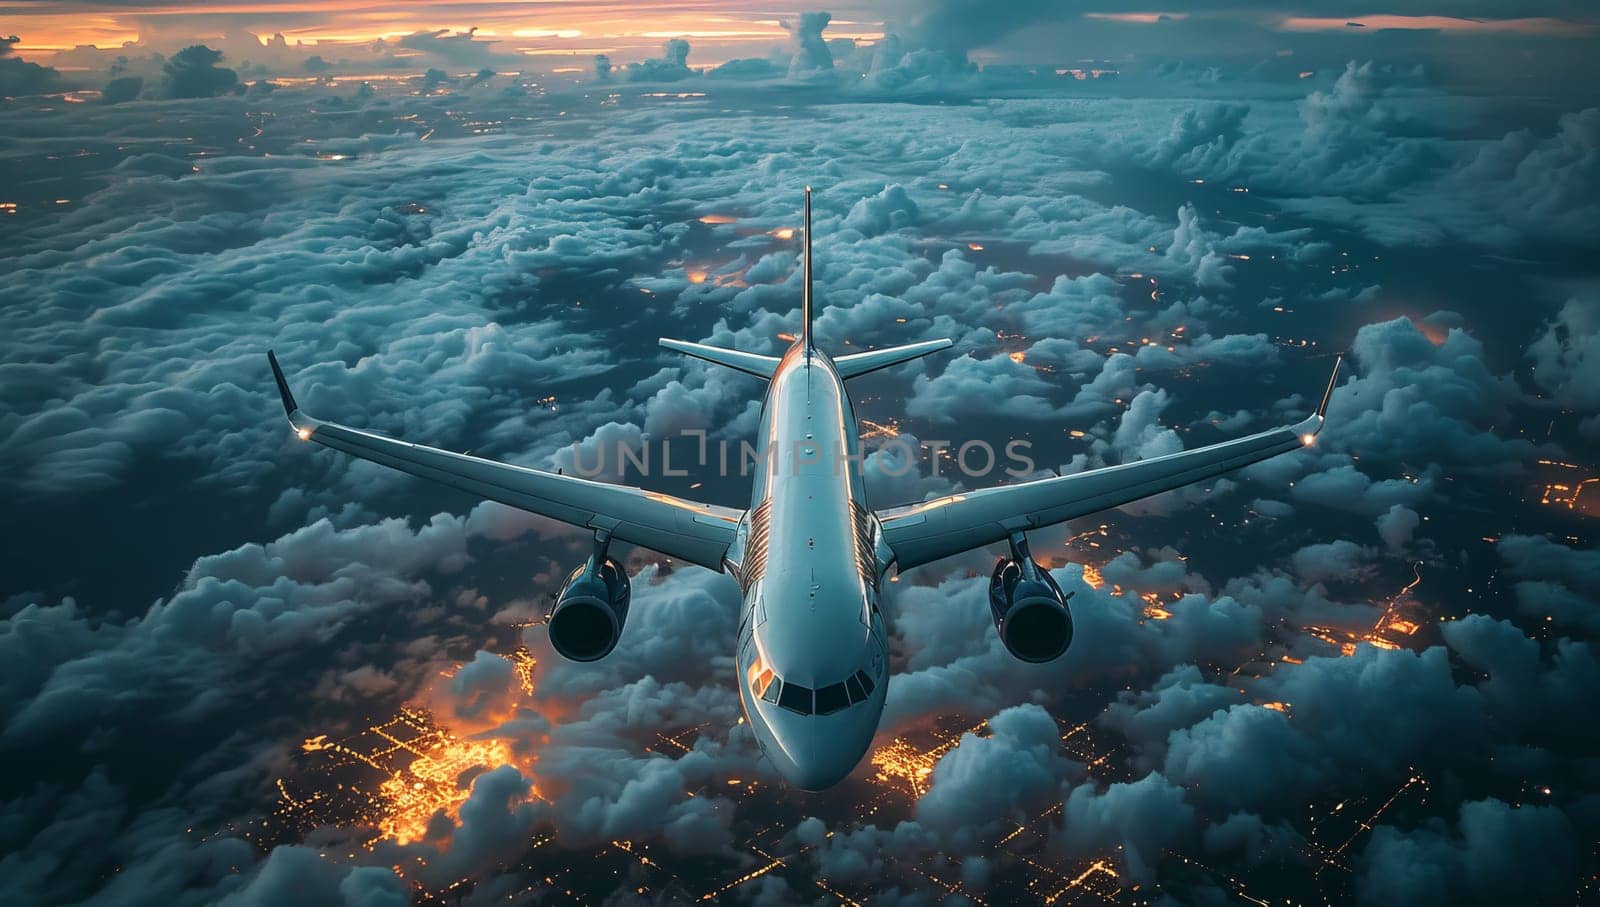 Airplane ascending through clouds over illuminated city at dusk